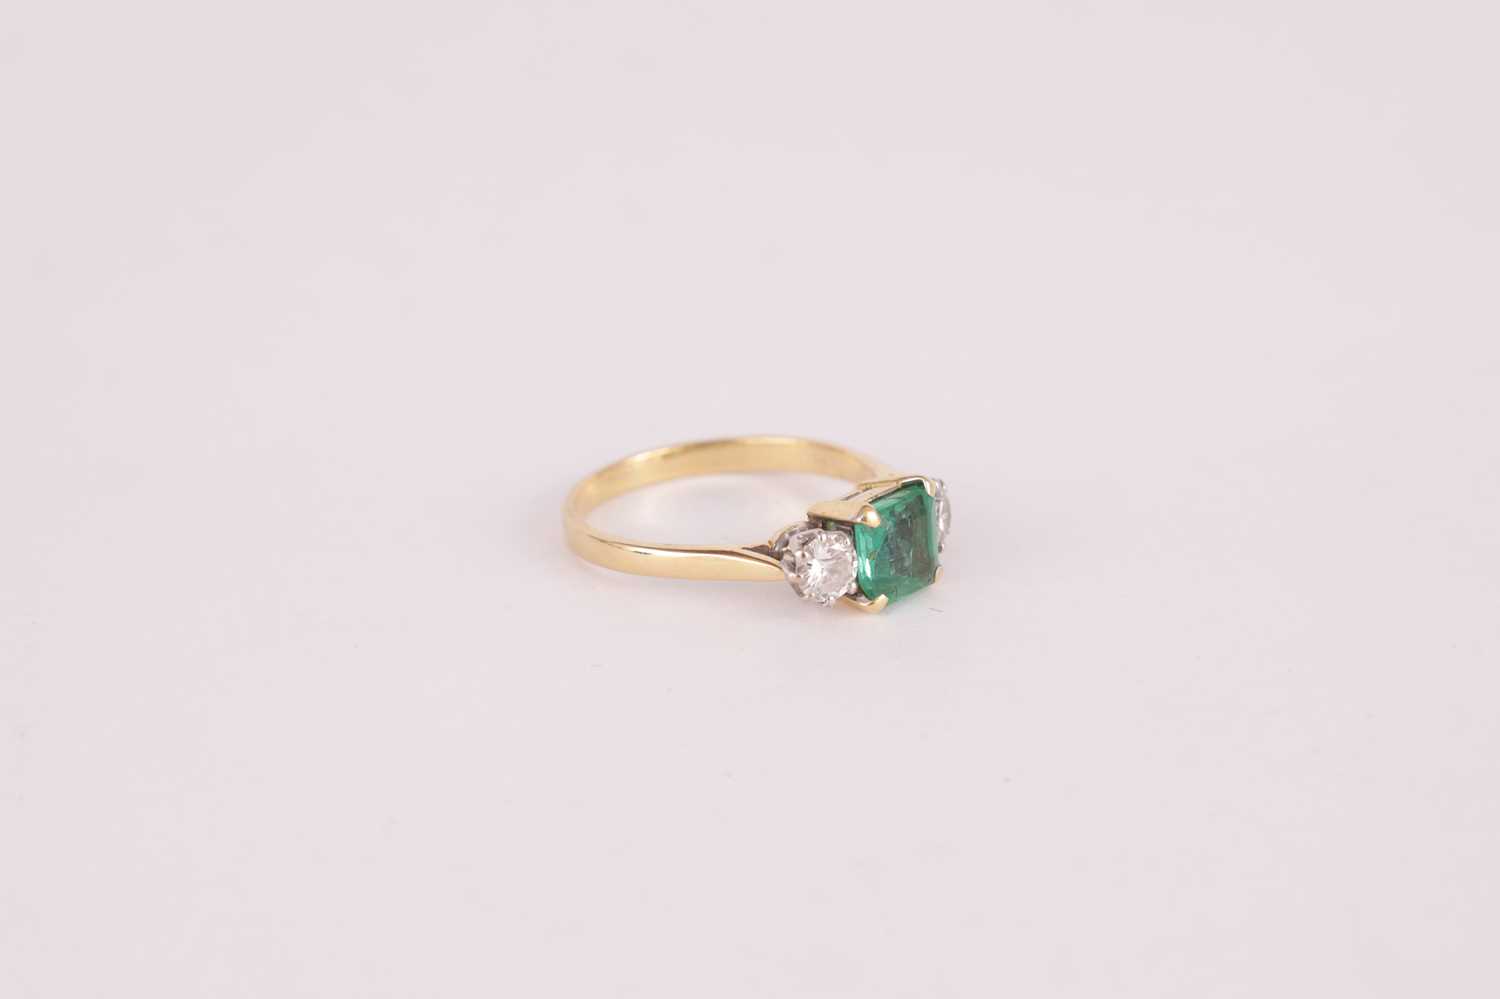 A LADIES 18CT GOLD THREE STONE EMERALD AND DIAMOND RING - Image 2 of 5